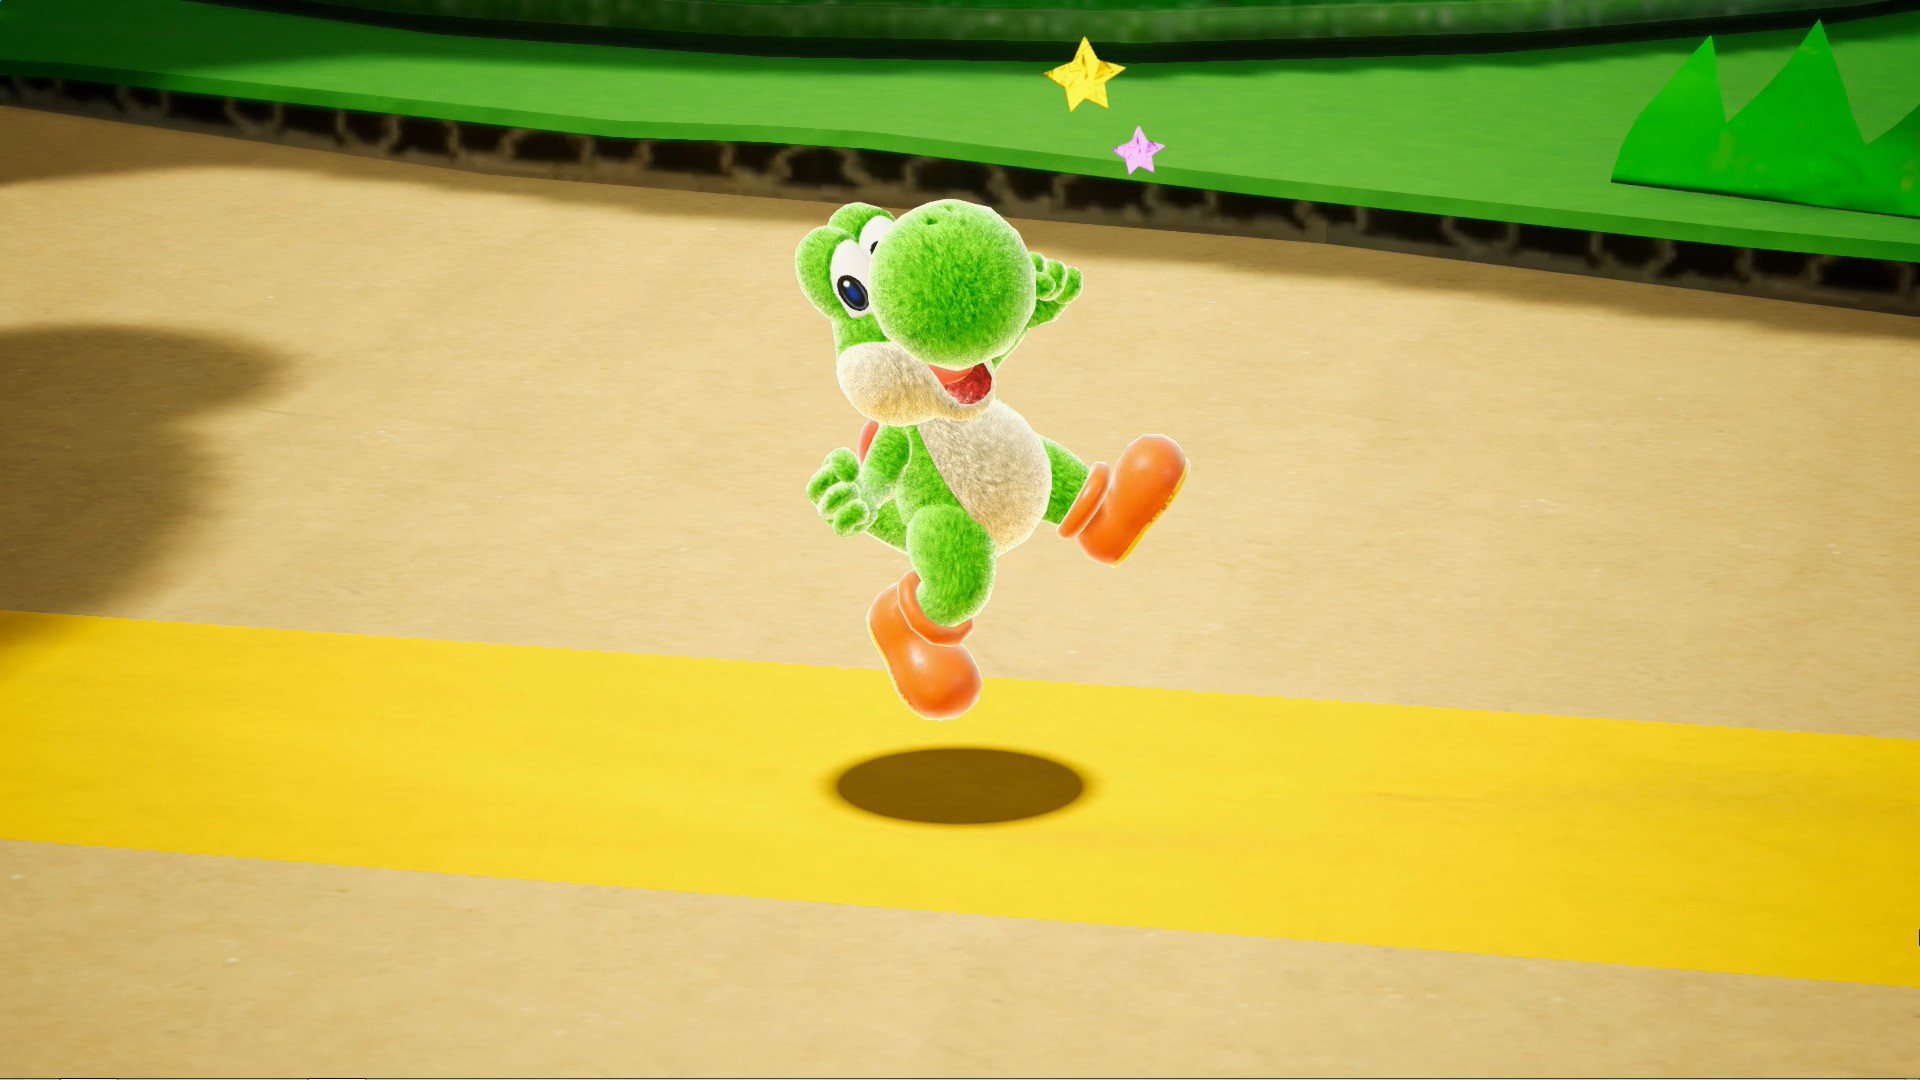 yoshi crafted world release date